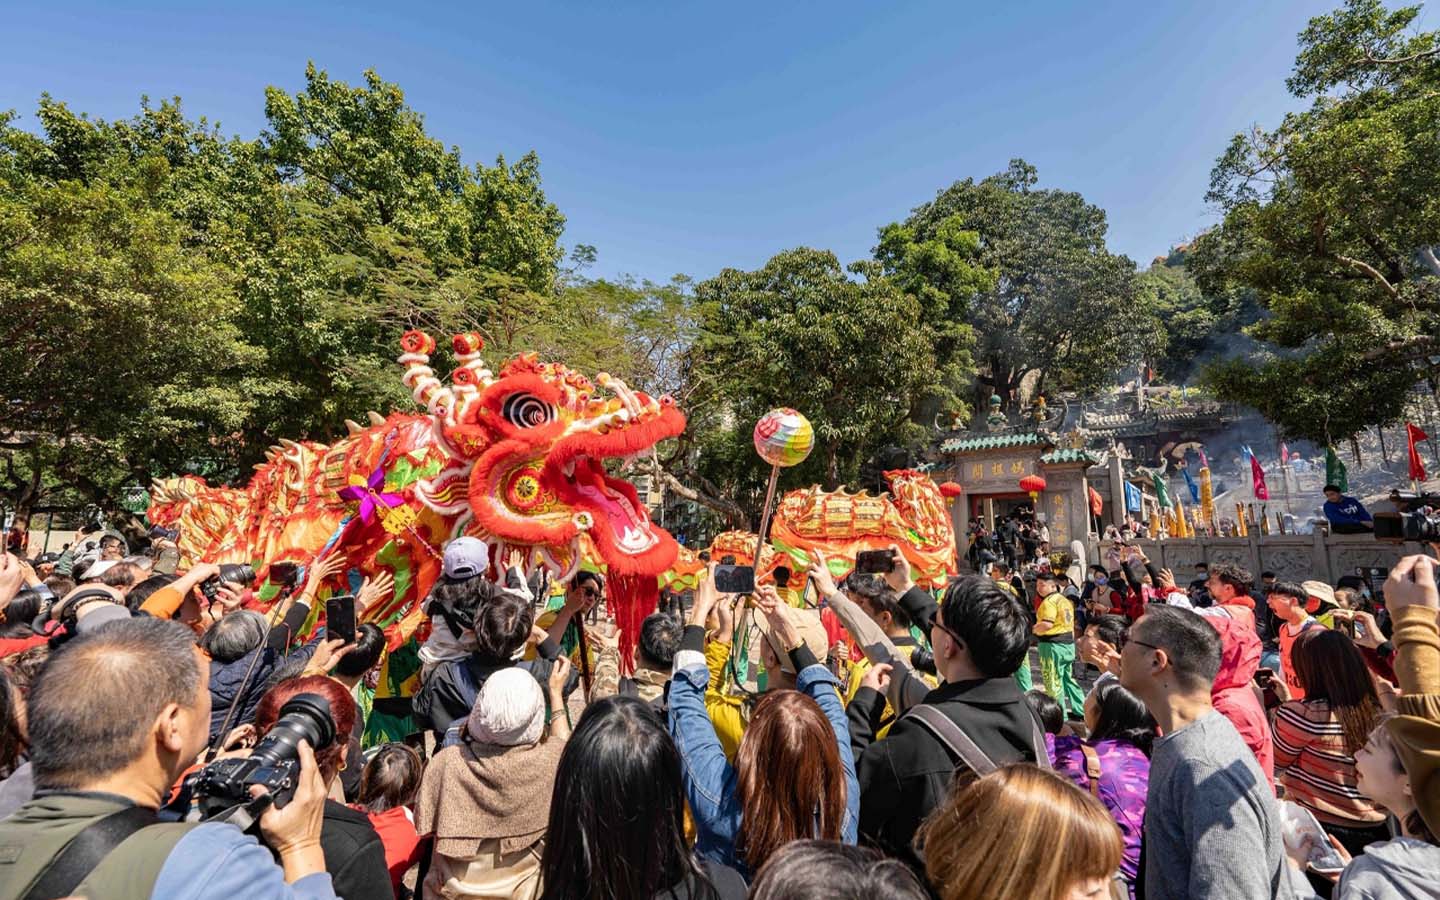 Tourism over the Chinese New Year holiday approaches pre-pandemic levels